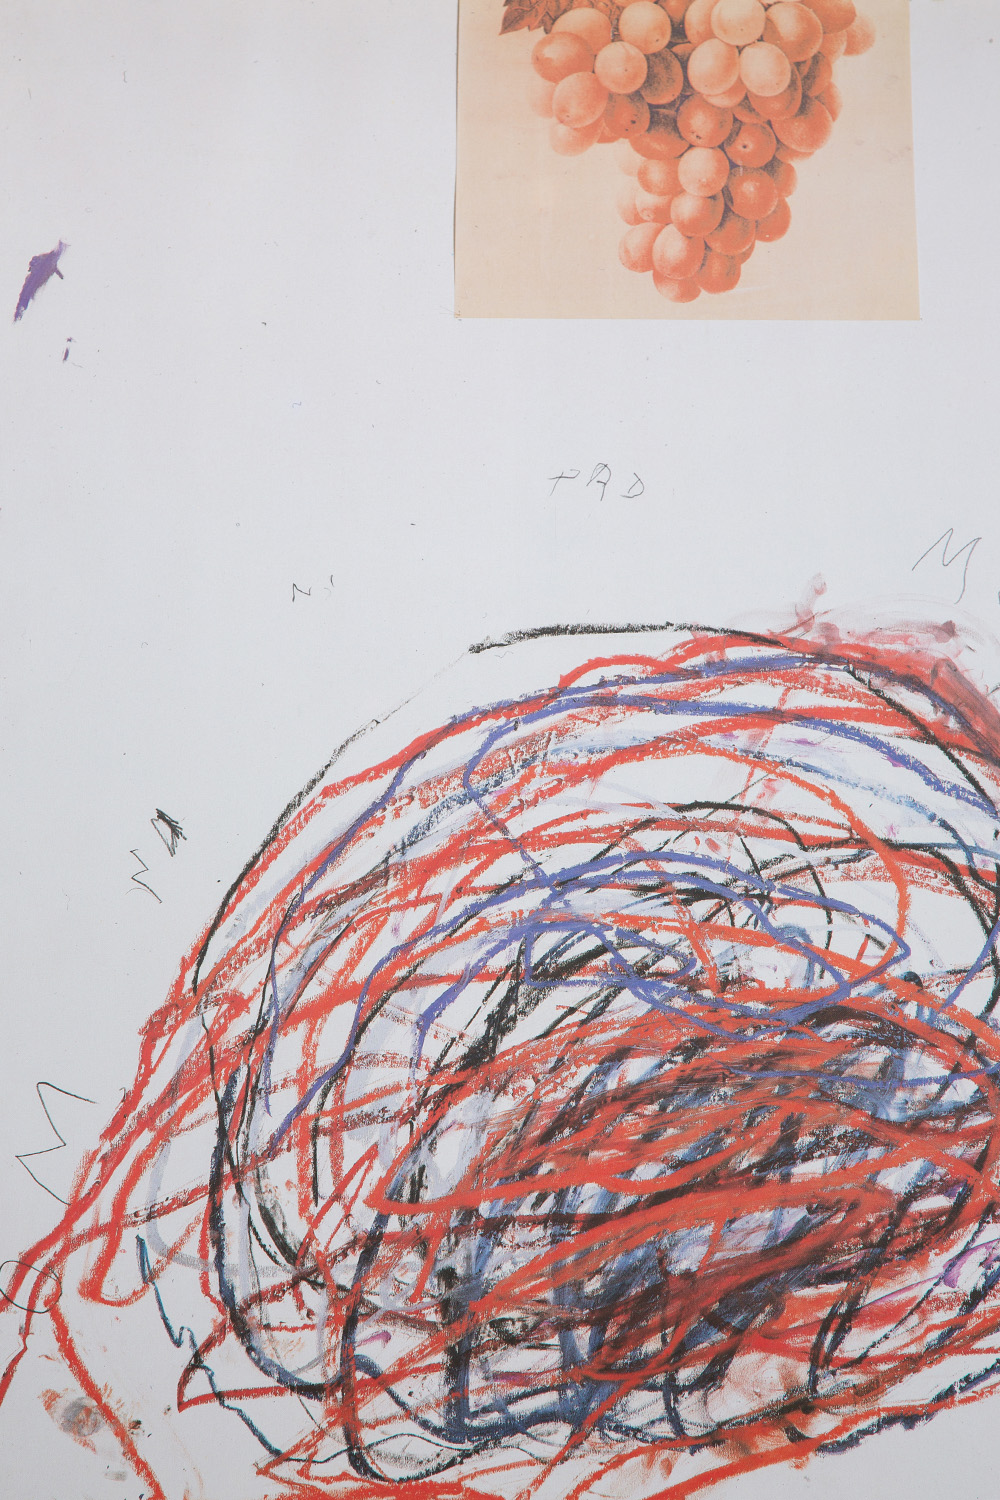 ‘Untitled’ by Cy Twombly for CAPC Musée d’Art contemporain , 1984